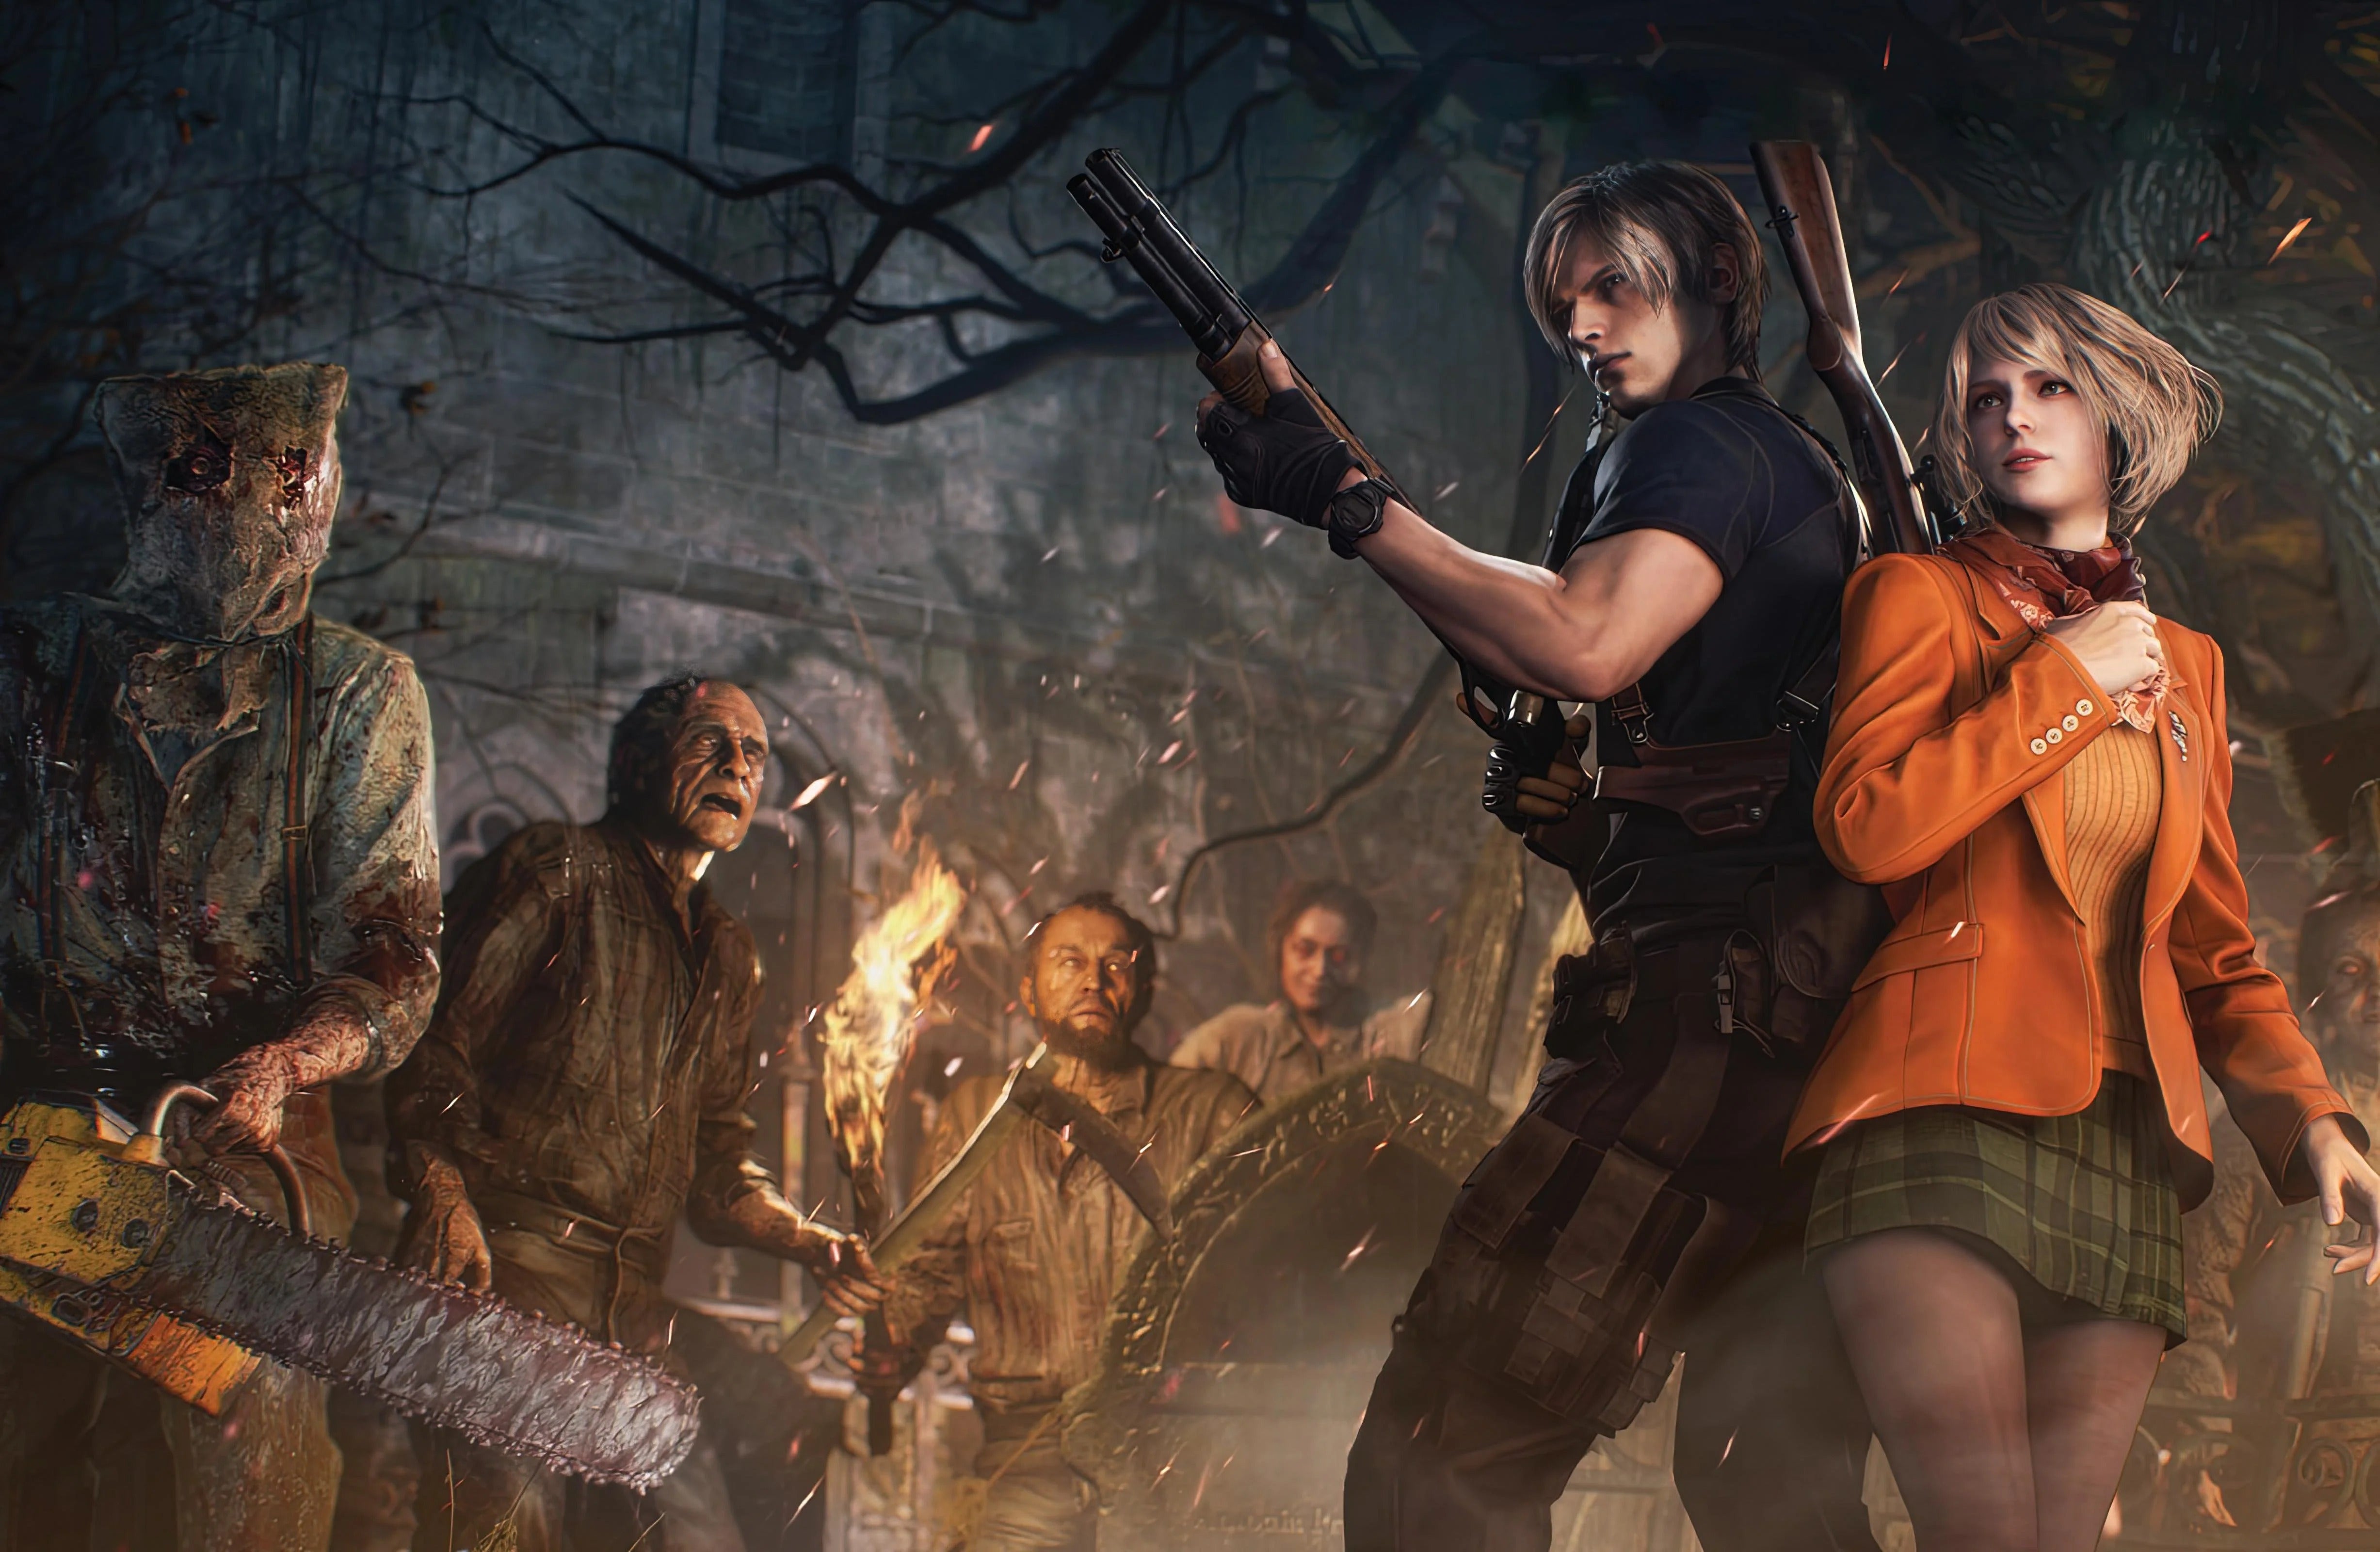 Image for Resident Evil 4 Remake | Critical Consensus